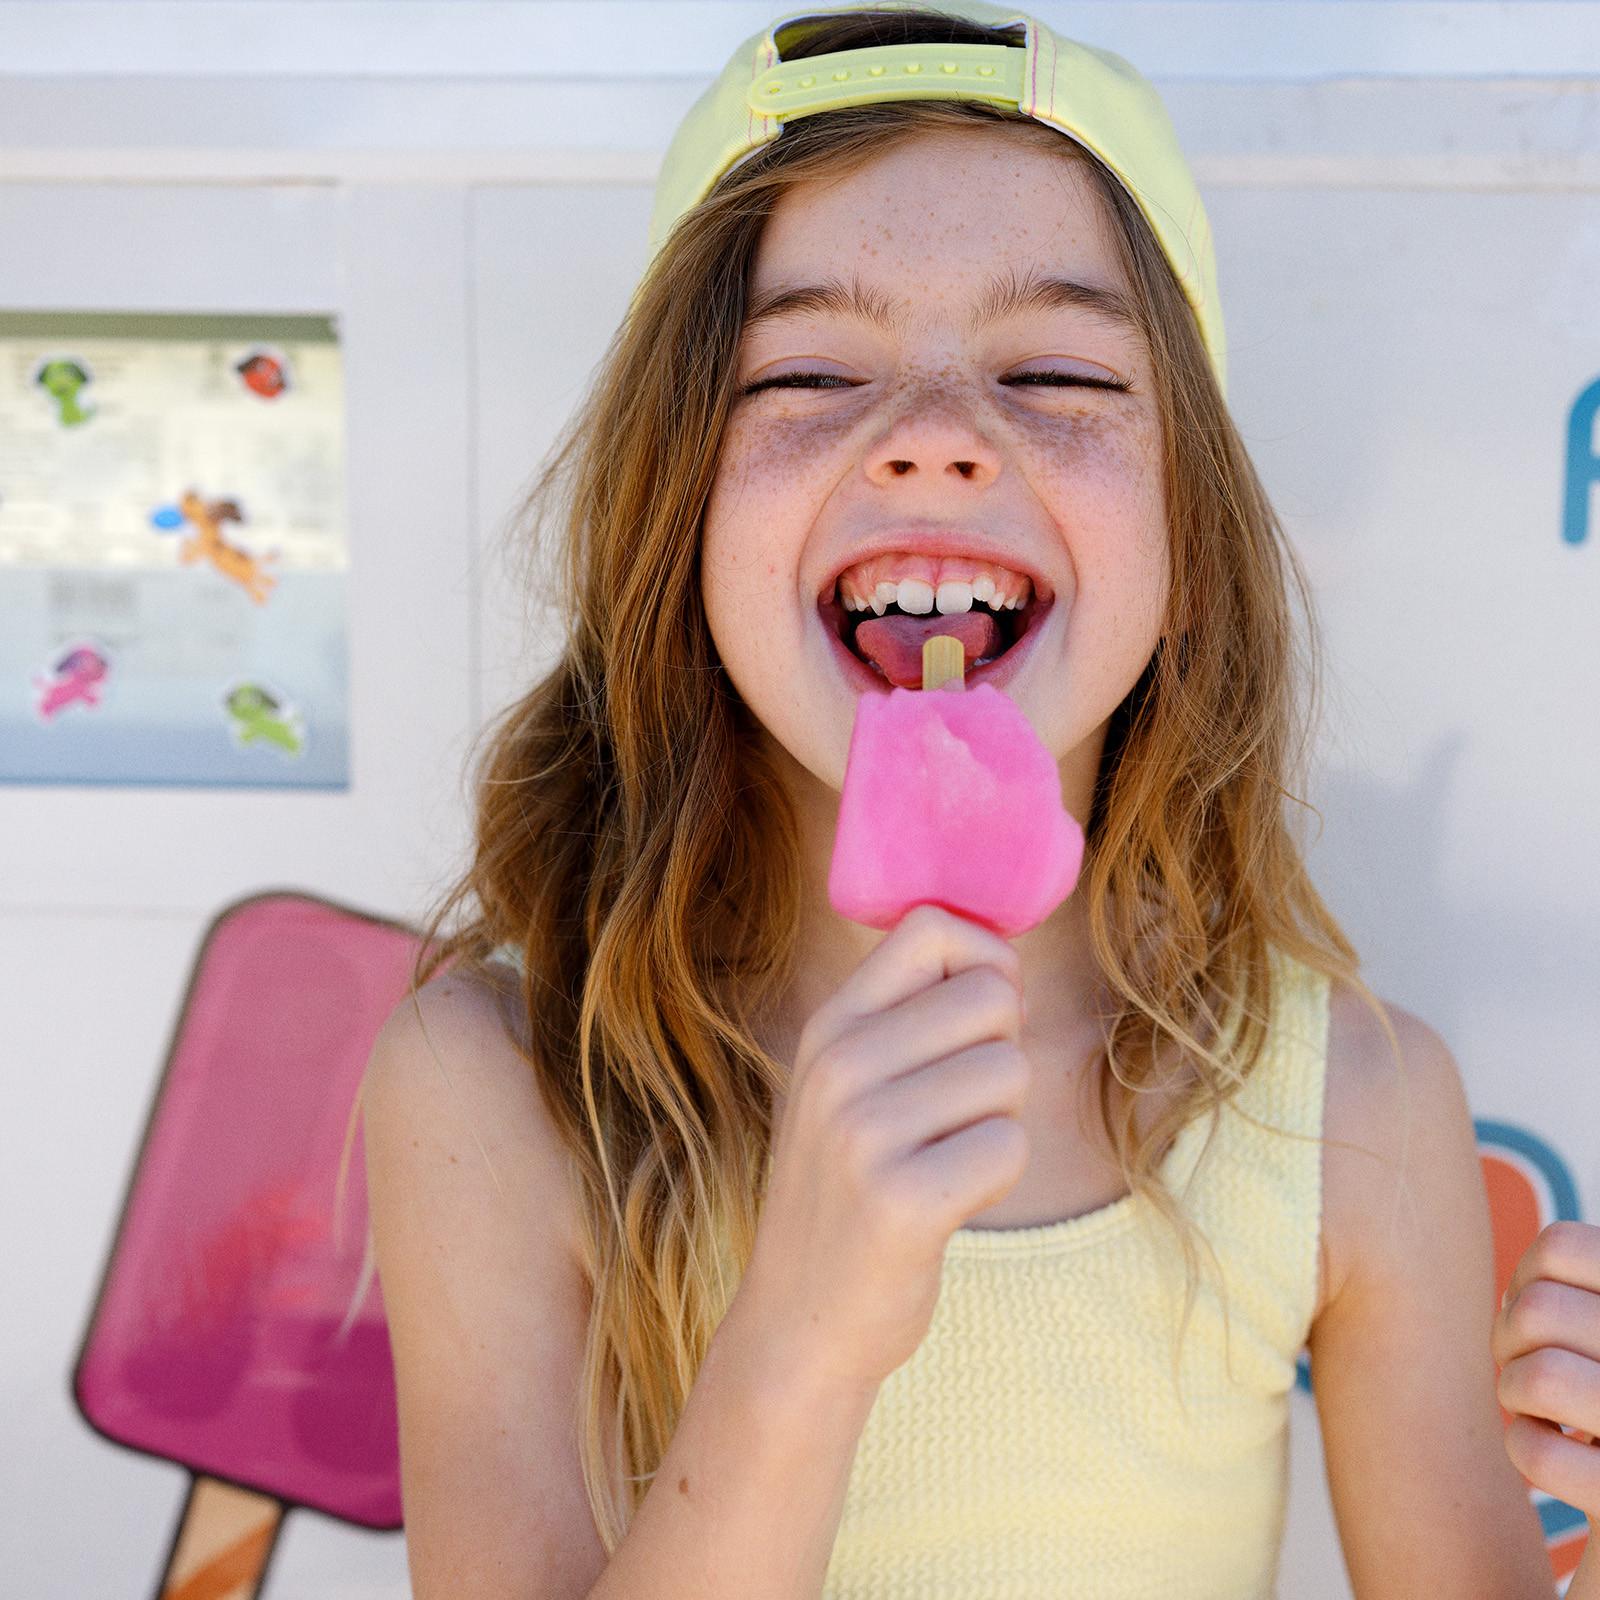 Child smiling with ice lolly wearing yellow cap and top